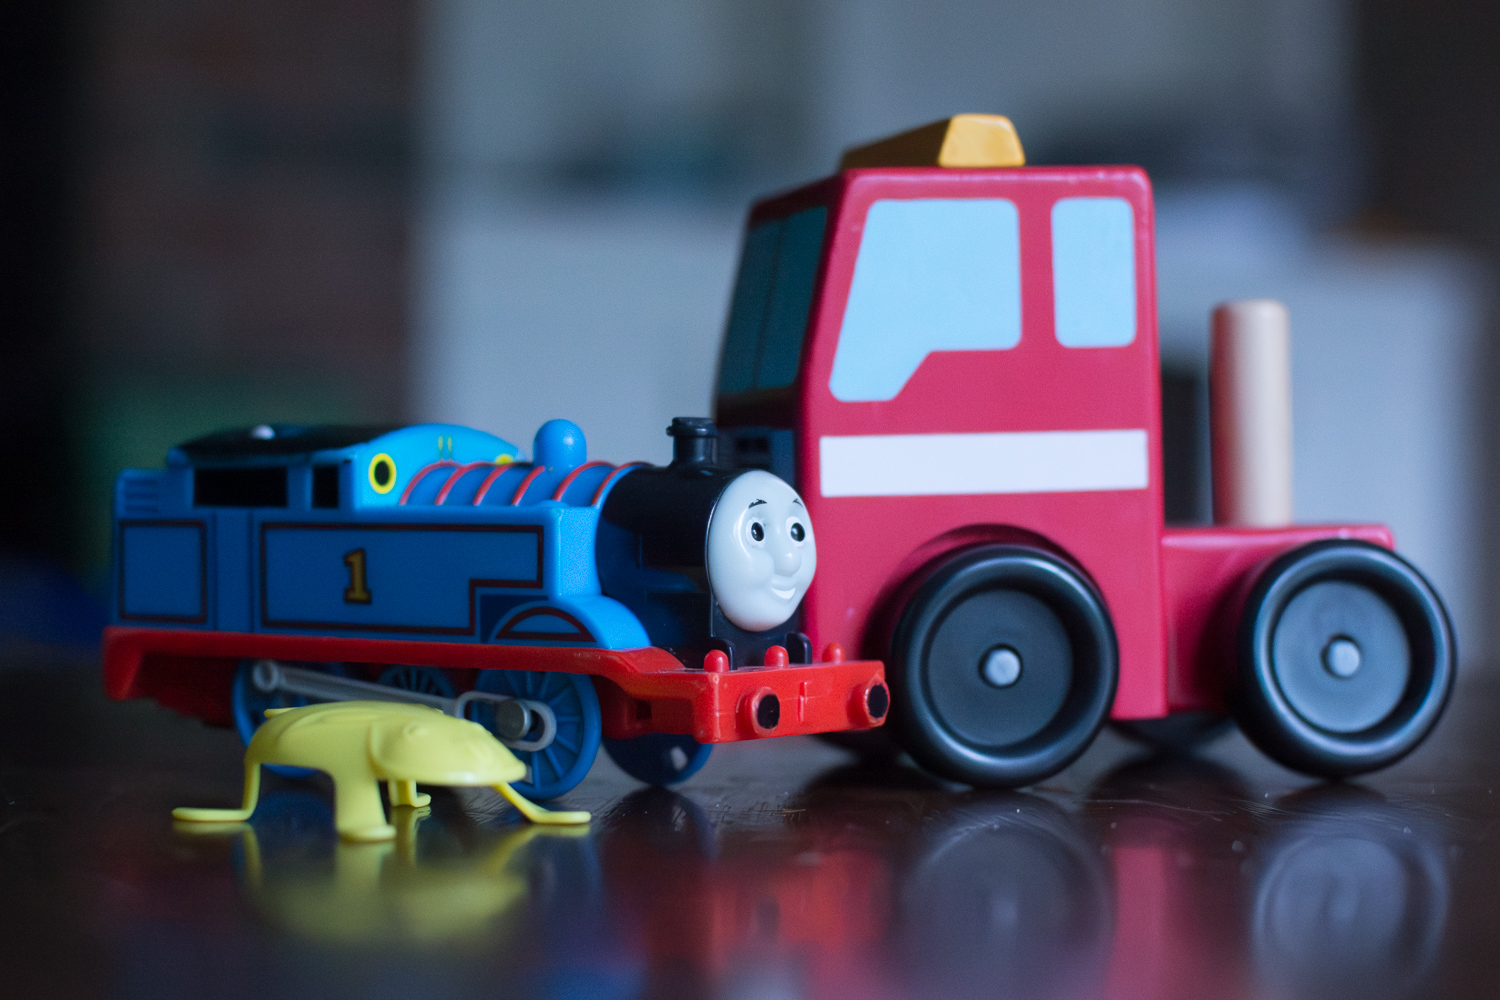 Lightroom's AI-Powered Denoise Feature: toy train and truck on a table surface.